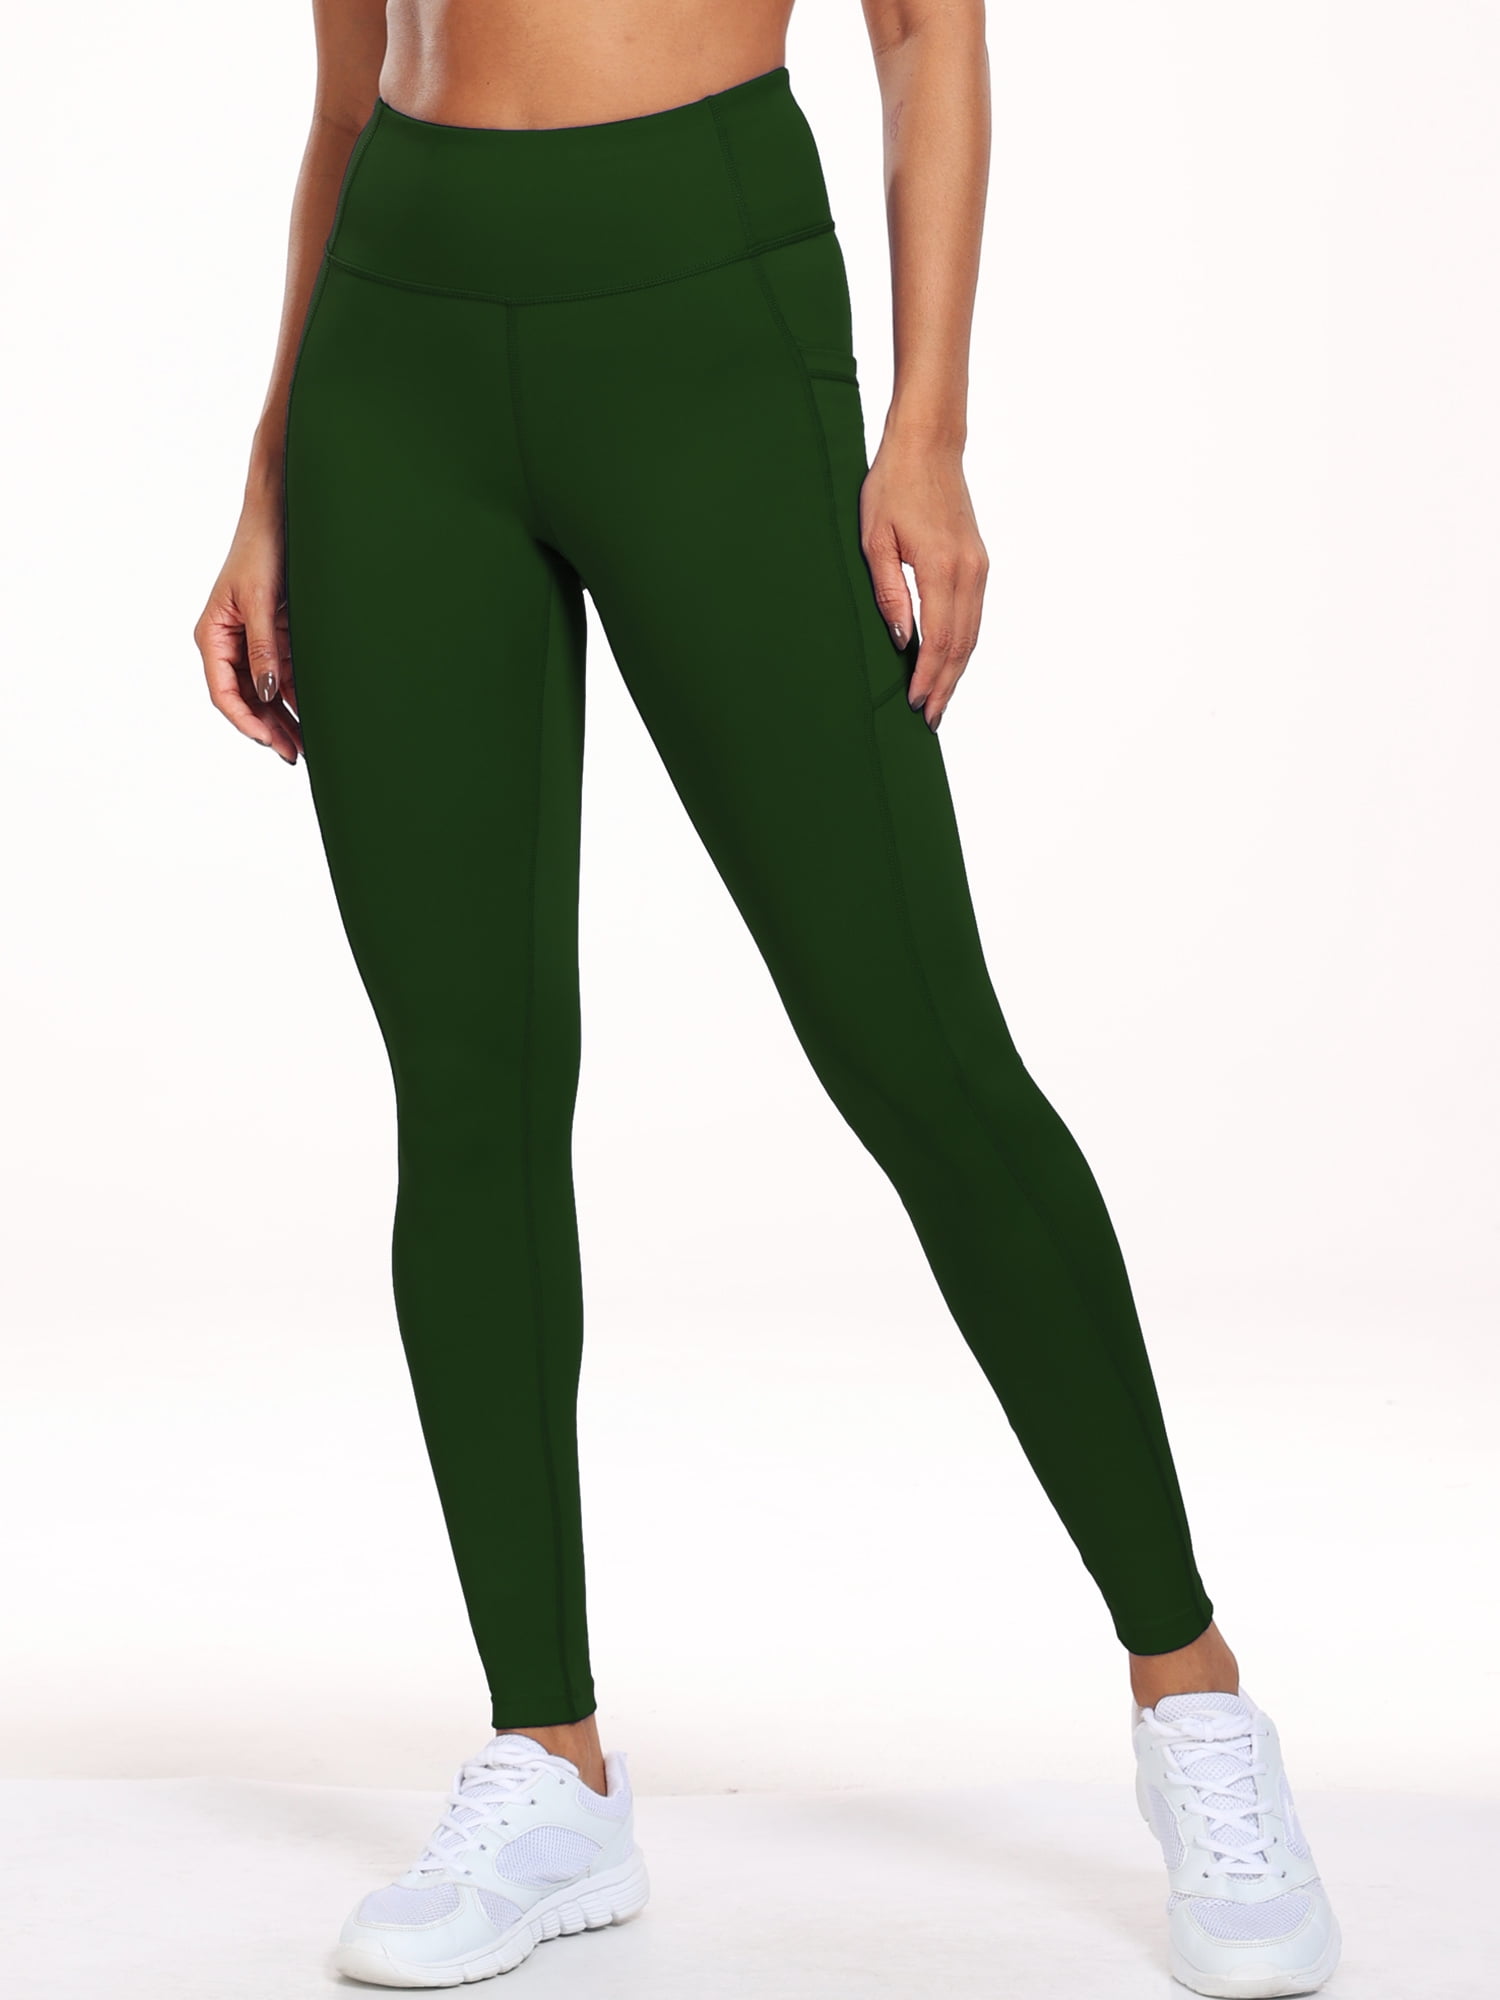 NELEUS Womens High Waist Ankle Yoga Leggings Workout with Two Pockets,Dark Green,US Size XL